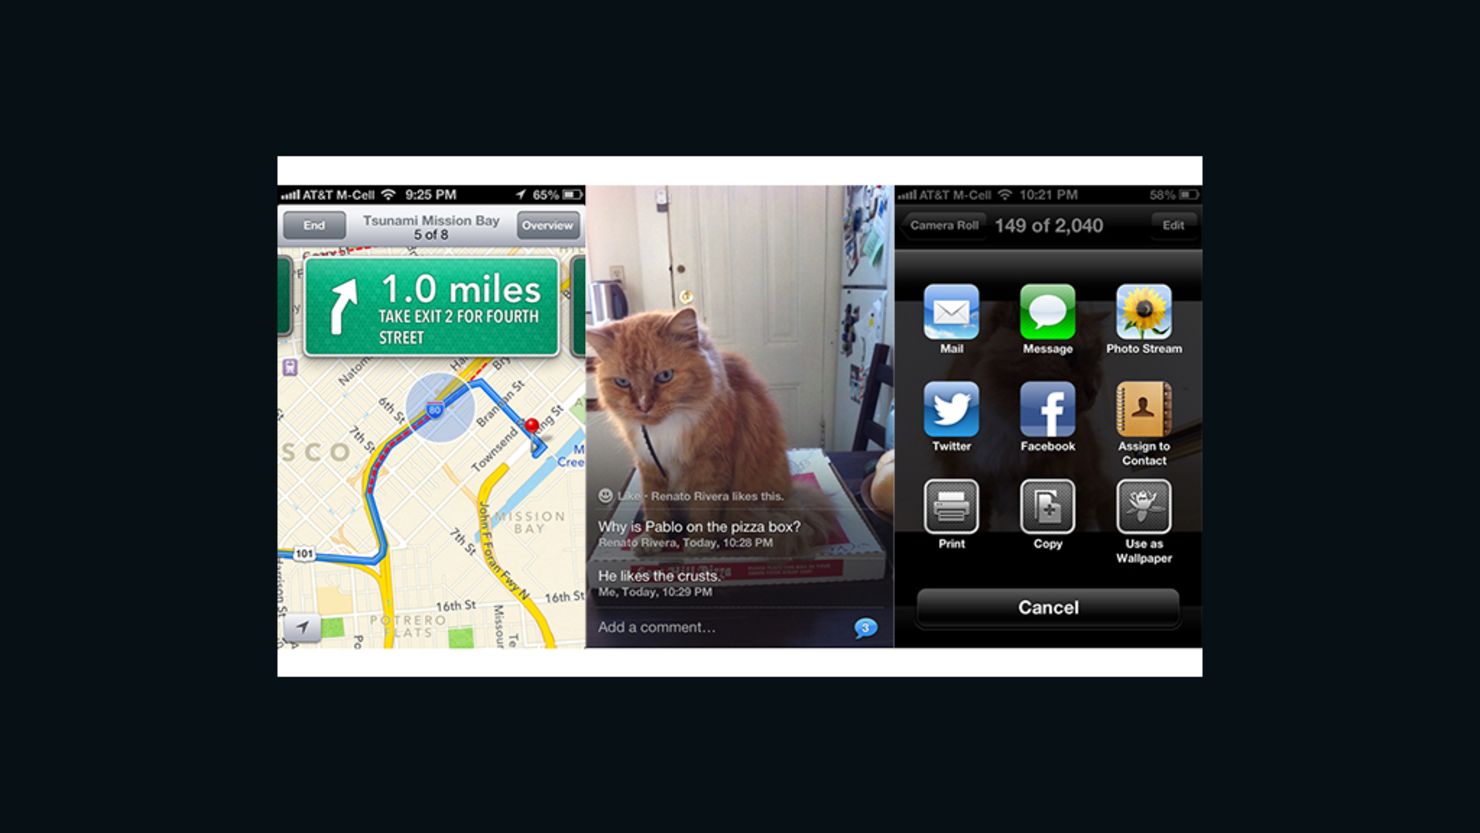 The new Maps app, Photo Stream tool and sharing options in iOS 6. 